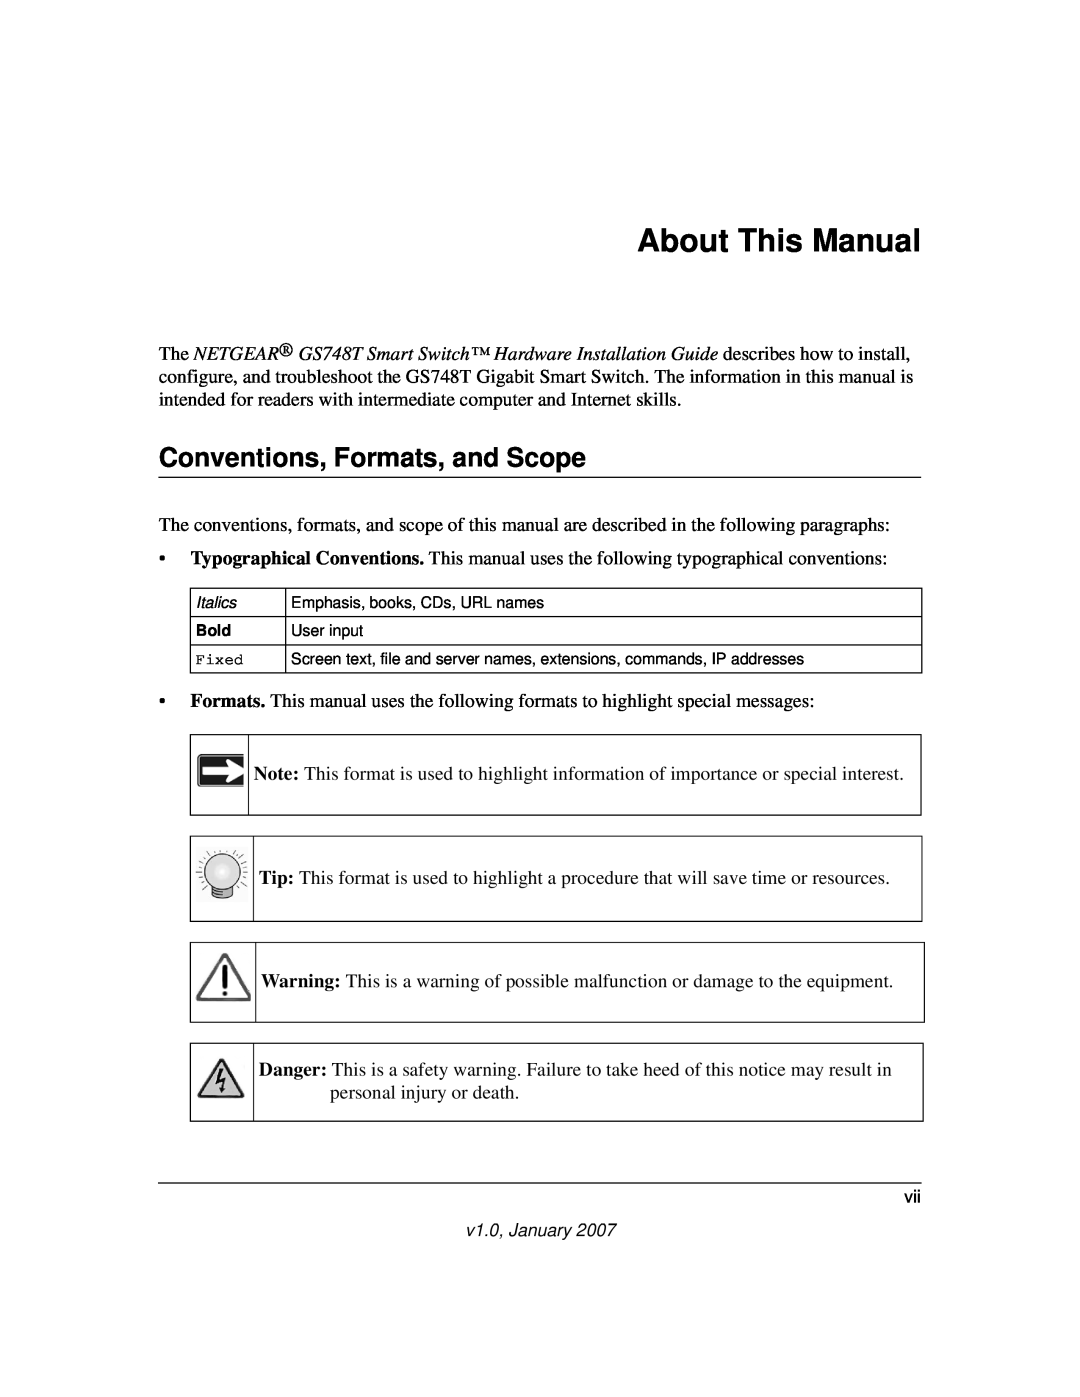 NETGEAR GS748T manual About This Manual, Conventions, Formats, and Scope 